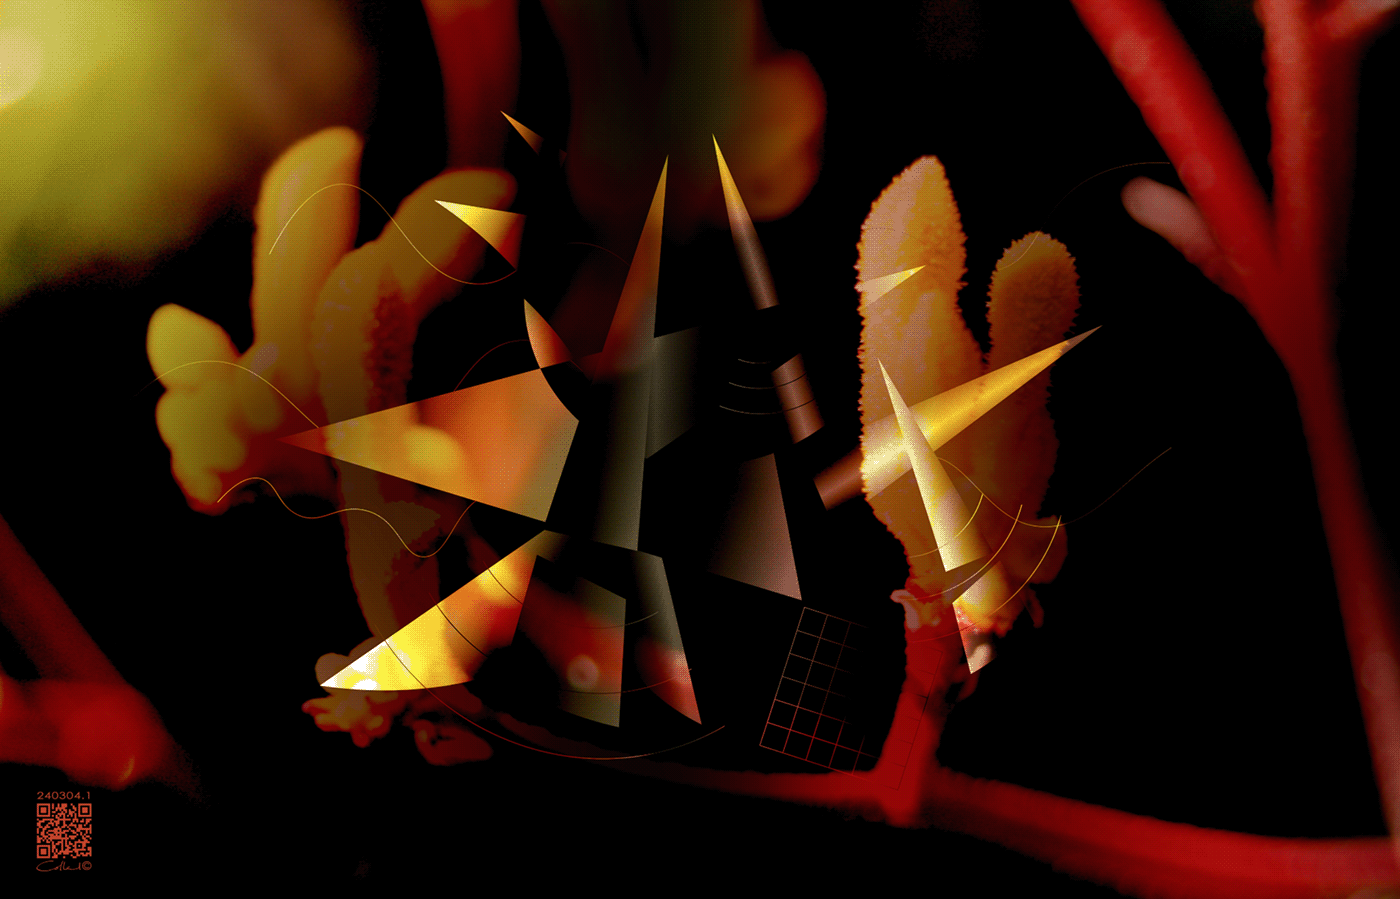 pacific abstract digitalart artwork adobe illustrator photomontage Digital Collage collages mariana fault